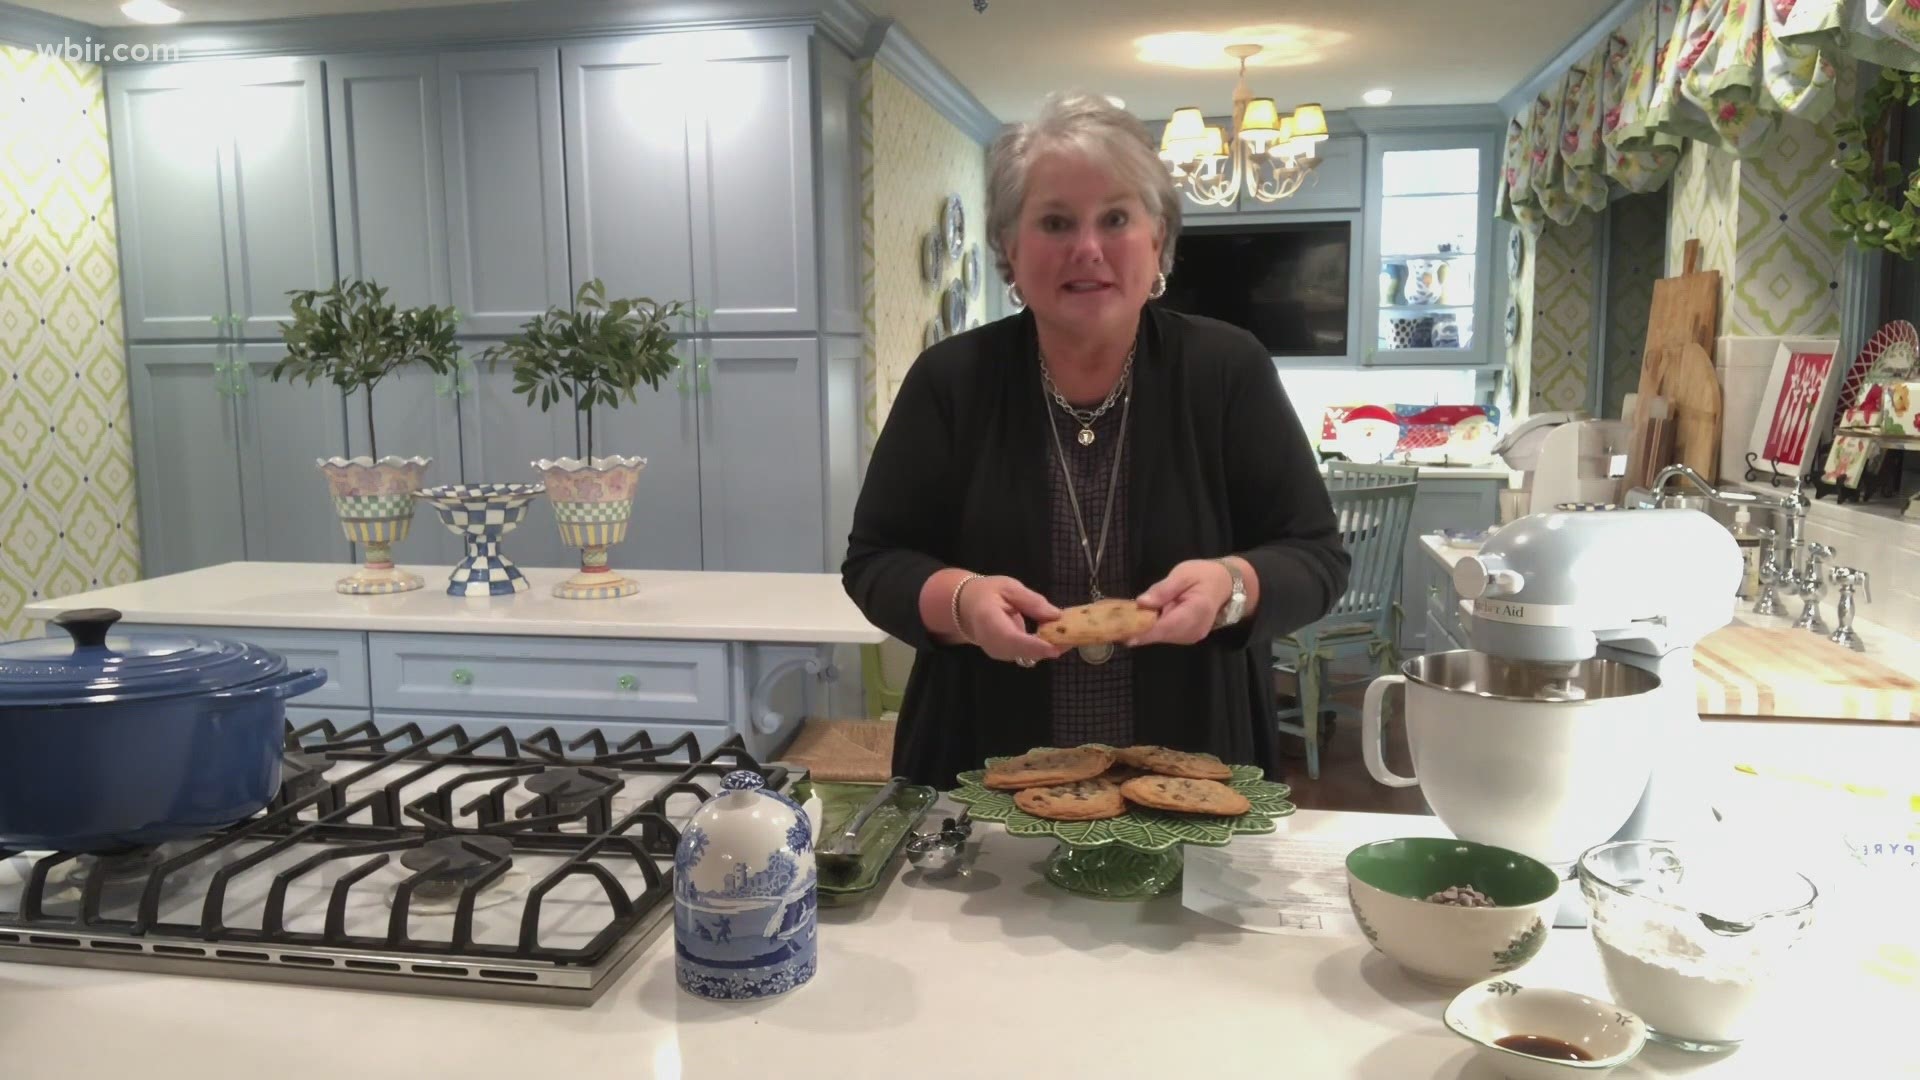 Joy McCabe share a chocolate chip cookie recipe that's perfect during the holidays or any time of year. Visit joymccabe.com for more of her recipes. Dec. 28, 2020-4p